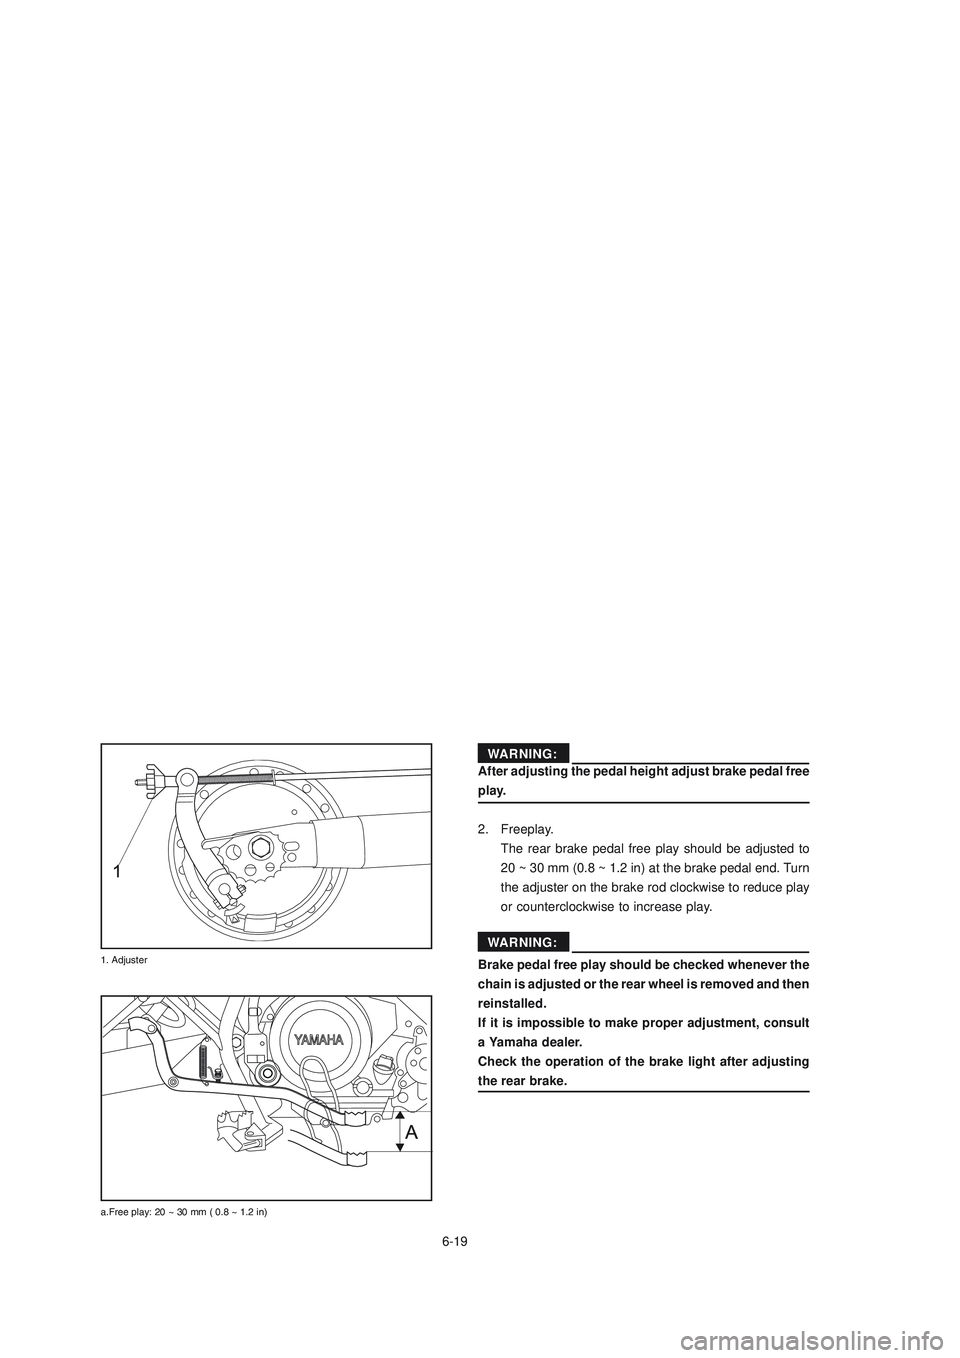 YAMAHA XTZ125 2008  Owners Manual 6-19
6-19
ADVERTENCIA
After adjusting the pedal height adjust brake pedal free
play.
2. Freeplay. The rear brake pedal free play should be adjusted to
20 ~ 30 mm (0.8 ~ 1.2 in) at the brake pedal end.